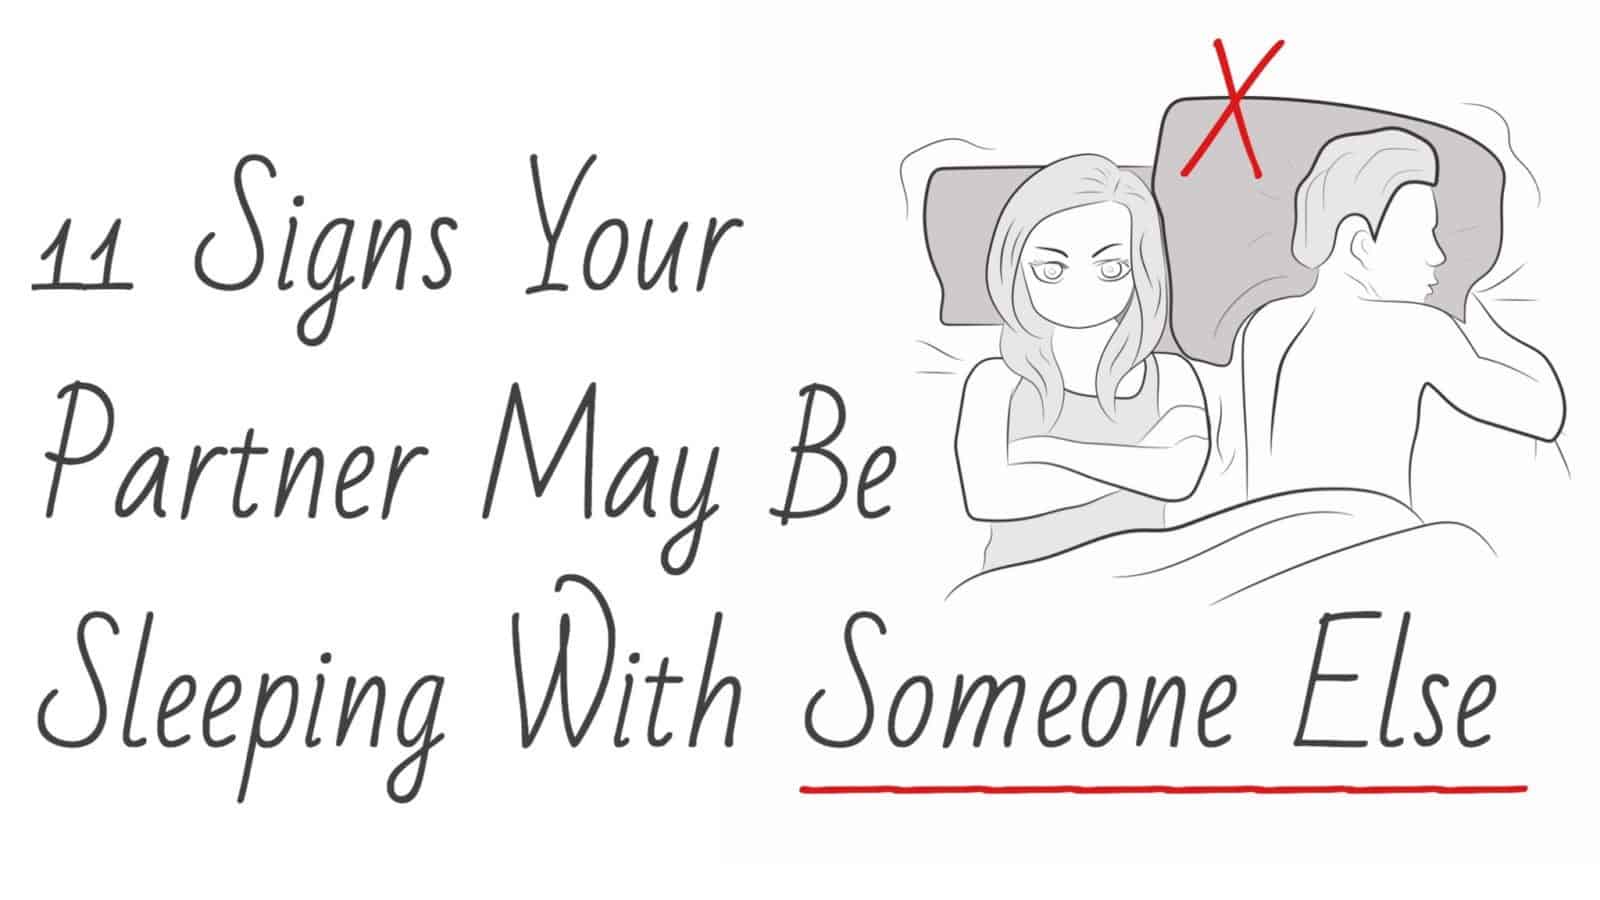 11 Signs Your Partner May Be Sleeping With Someone Else,Non Dairy Cheese Pizza